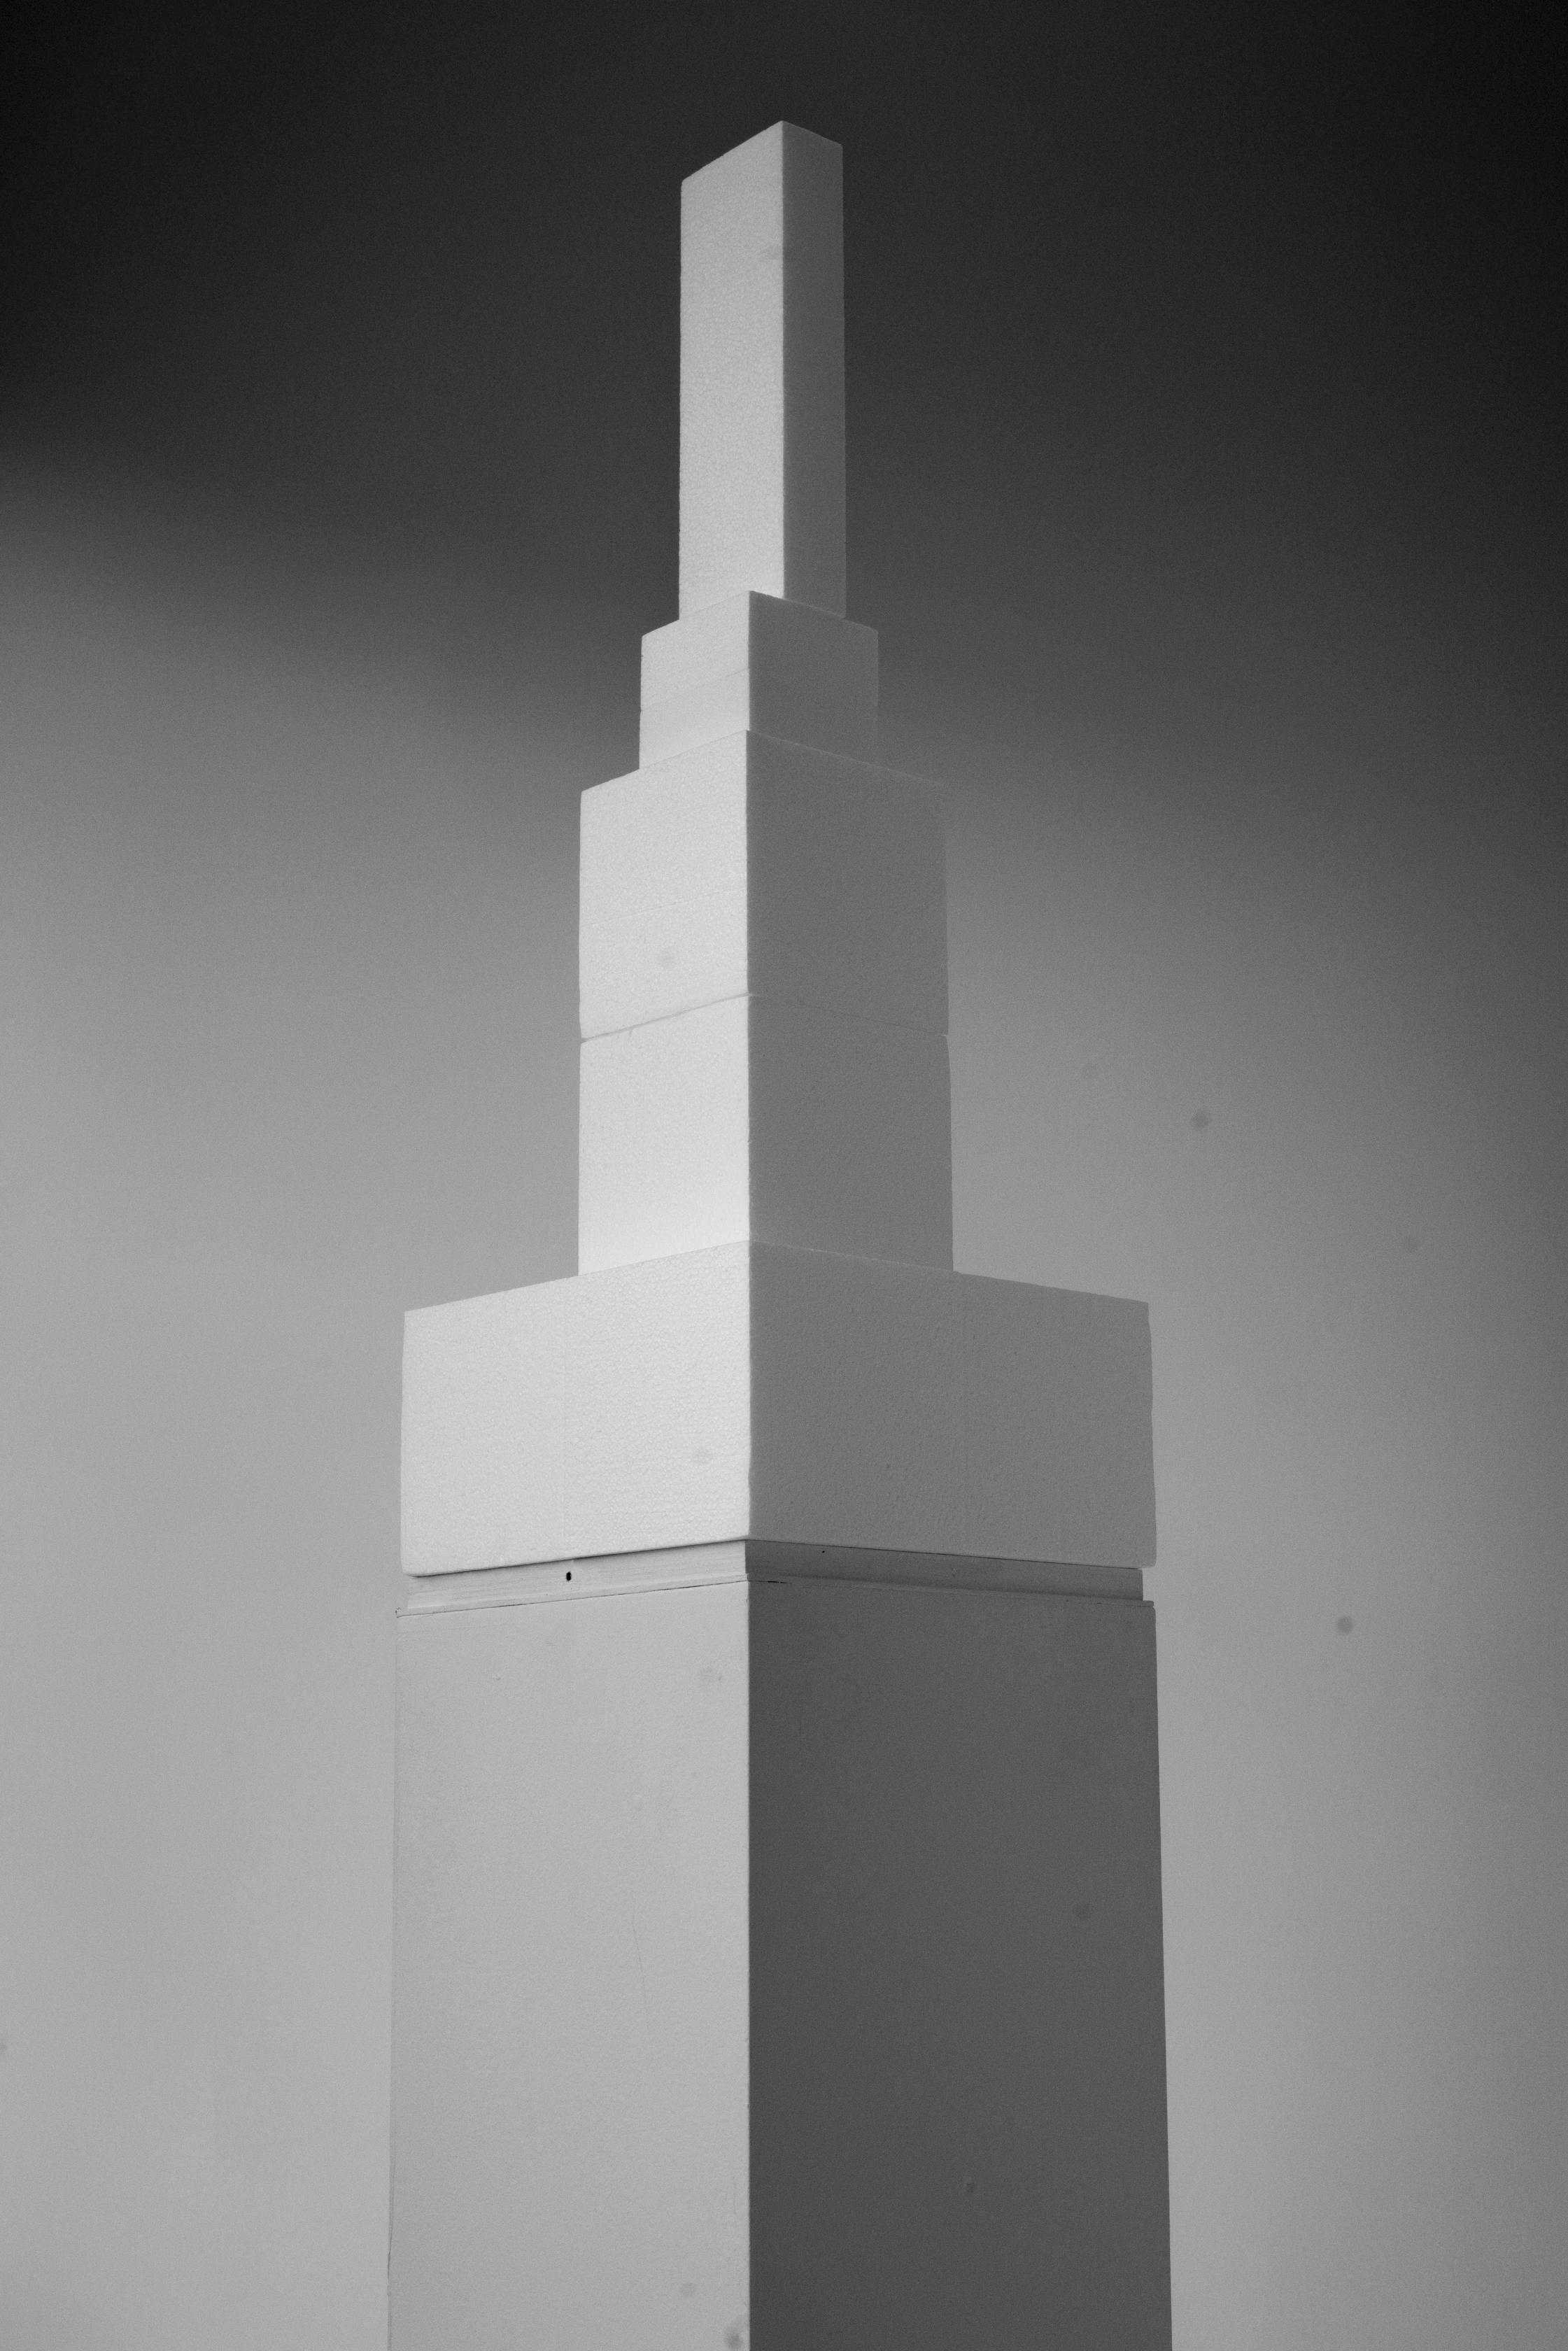 Black and white print with a styrofoam tower by artist Adam Ryder.